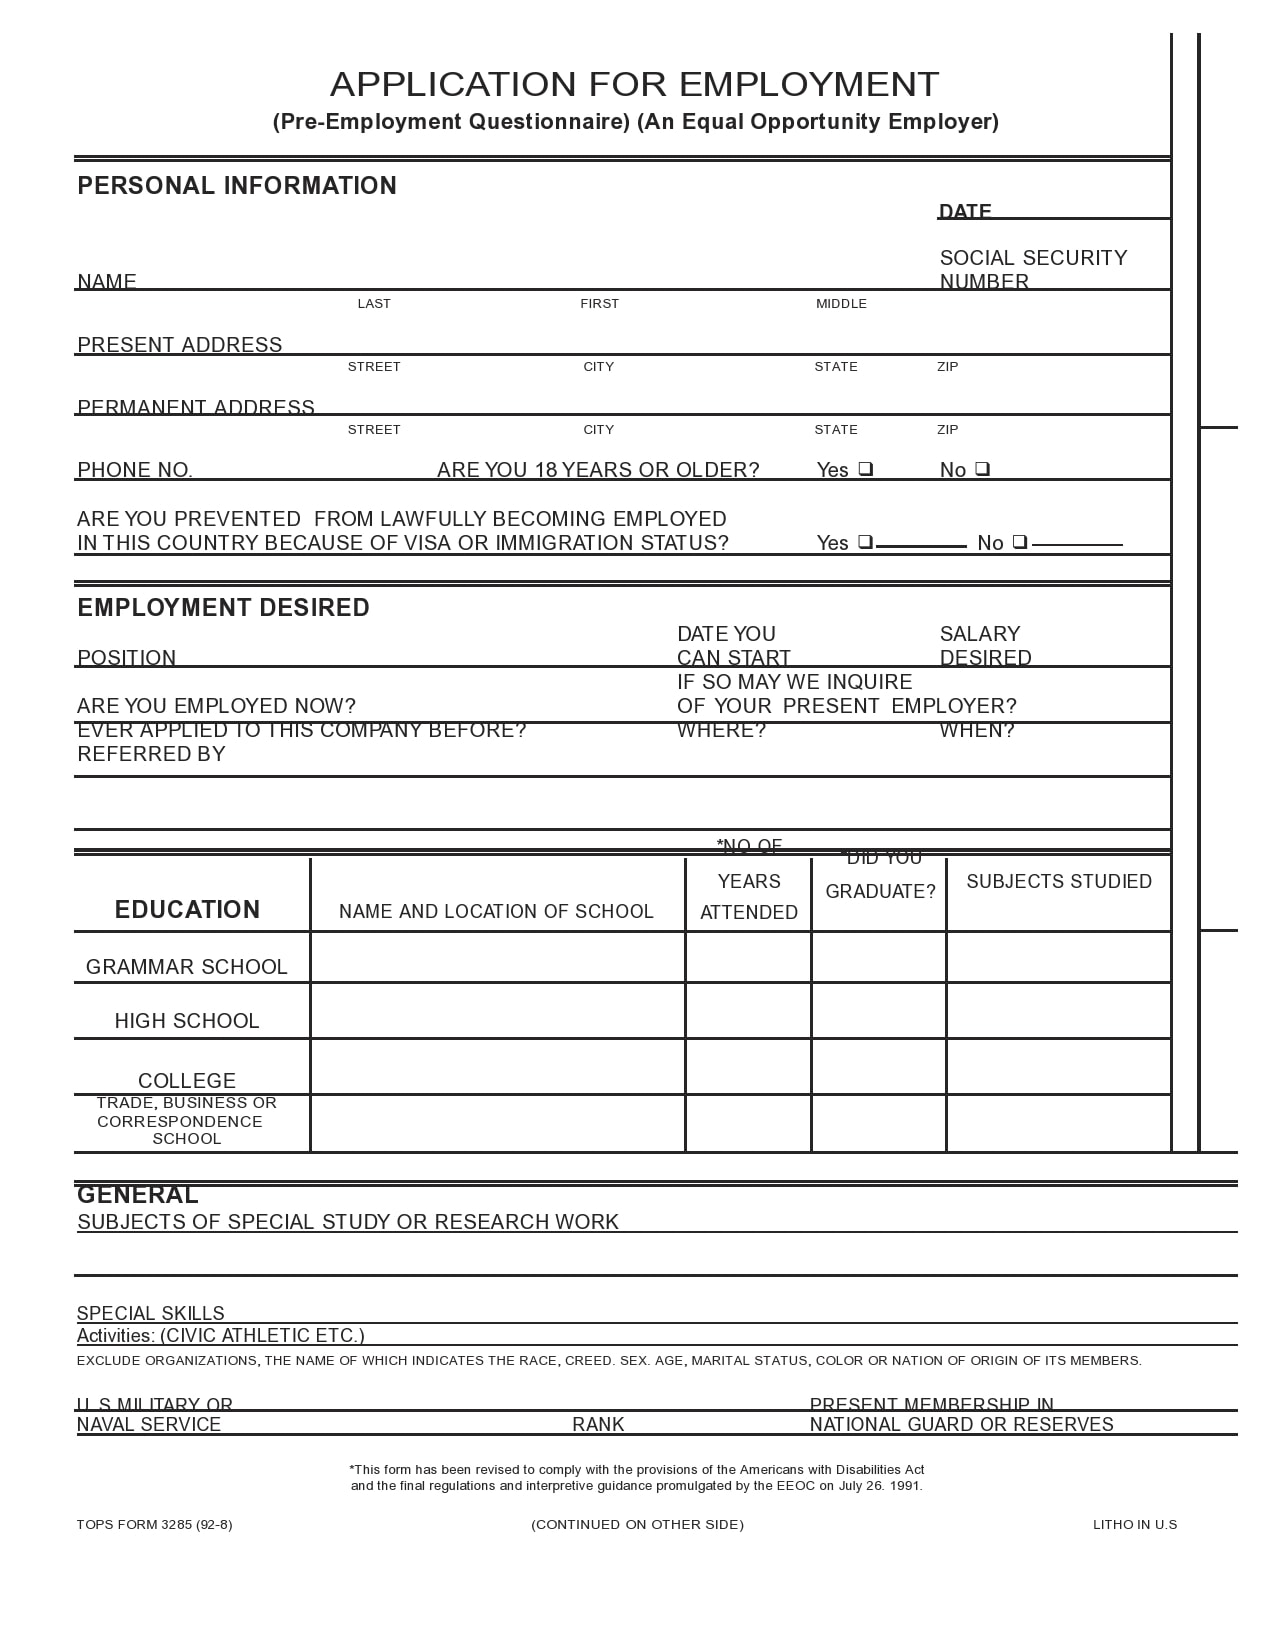 Free job applications forms to print